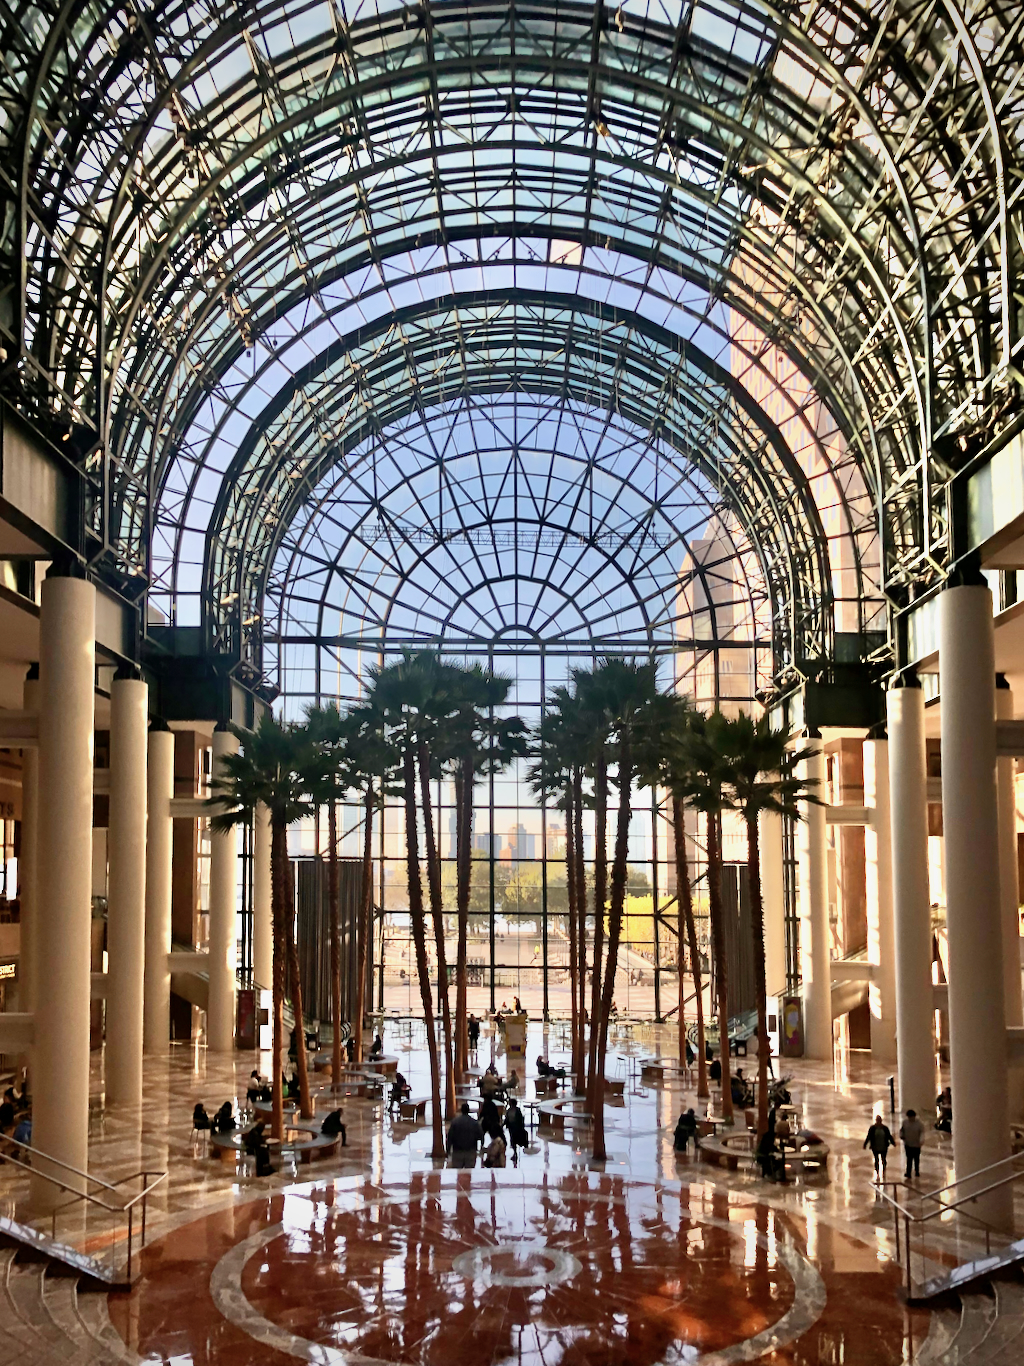 Palm trees in the Winter Garden at Brookfield Place.